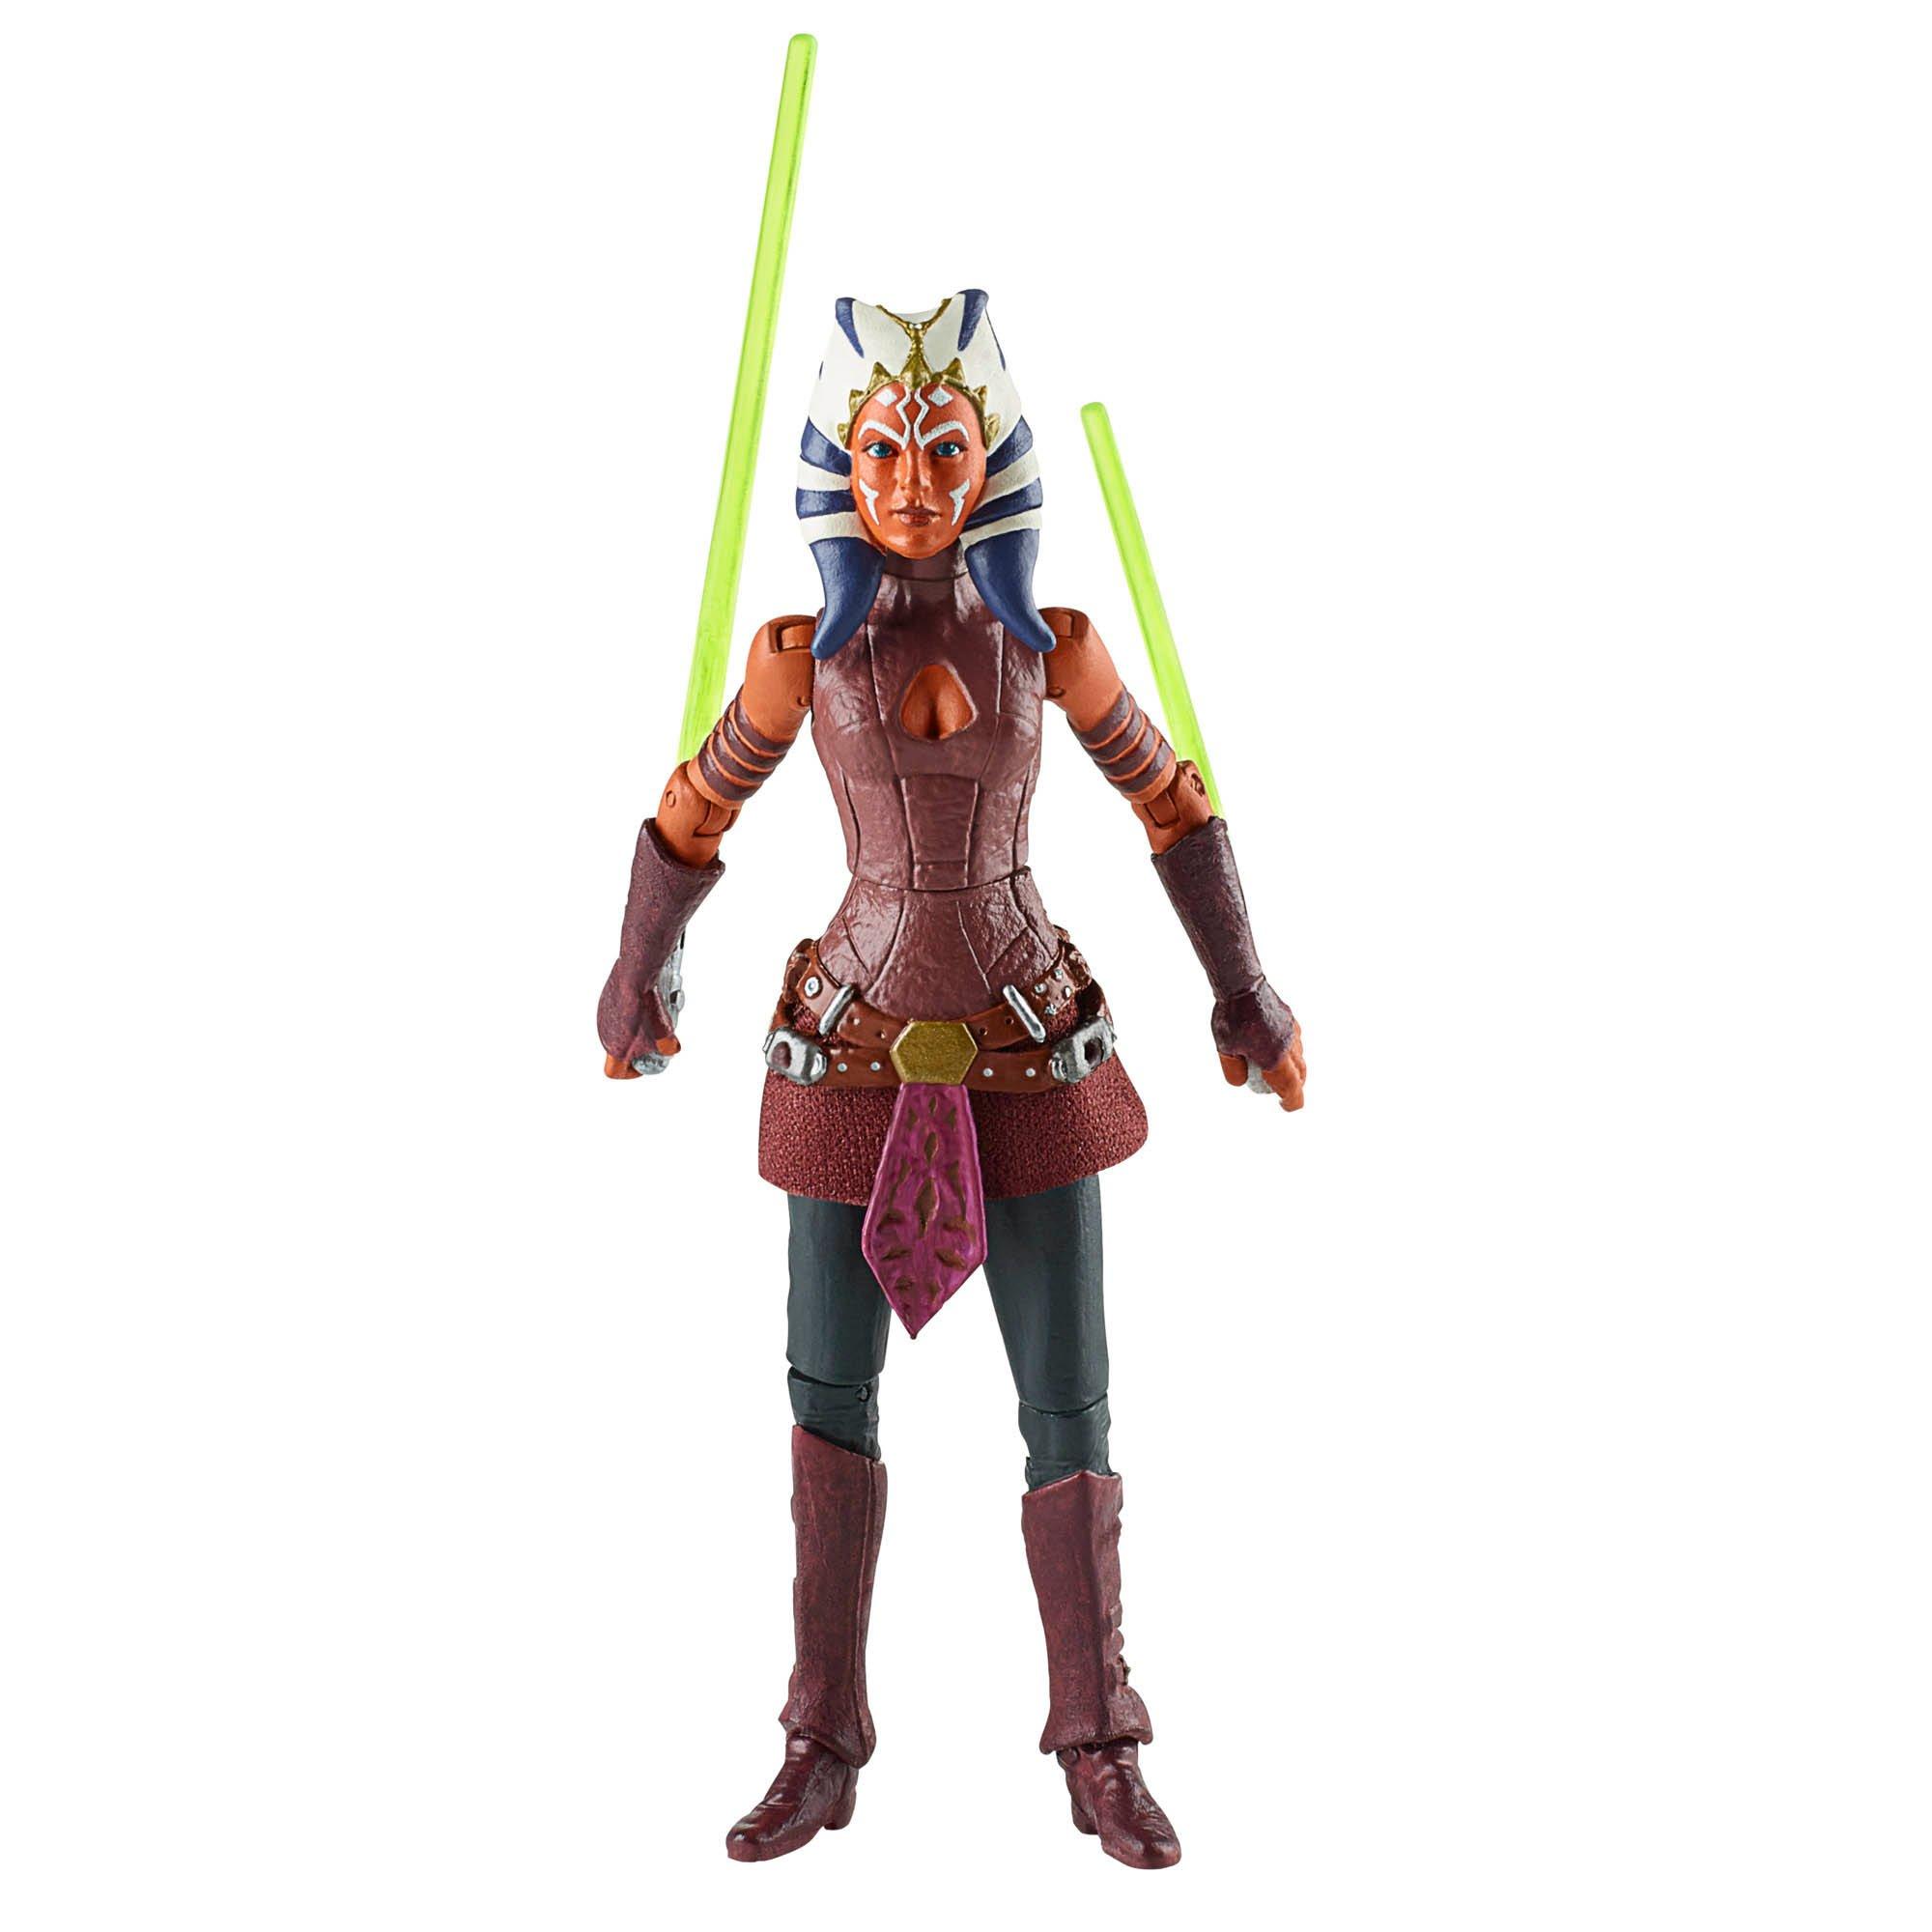 list item 1 of 7 Hasbro Star Wars The Vintage Collection Star Wars: The Clone Wars Ahsoka Tano 3.75-in Action Figure